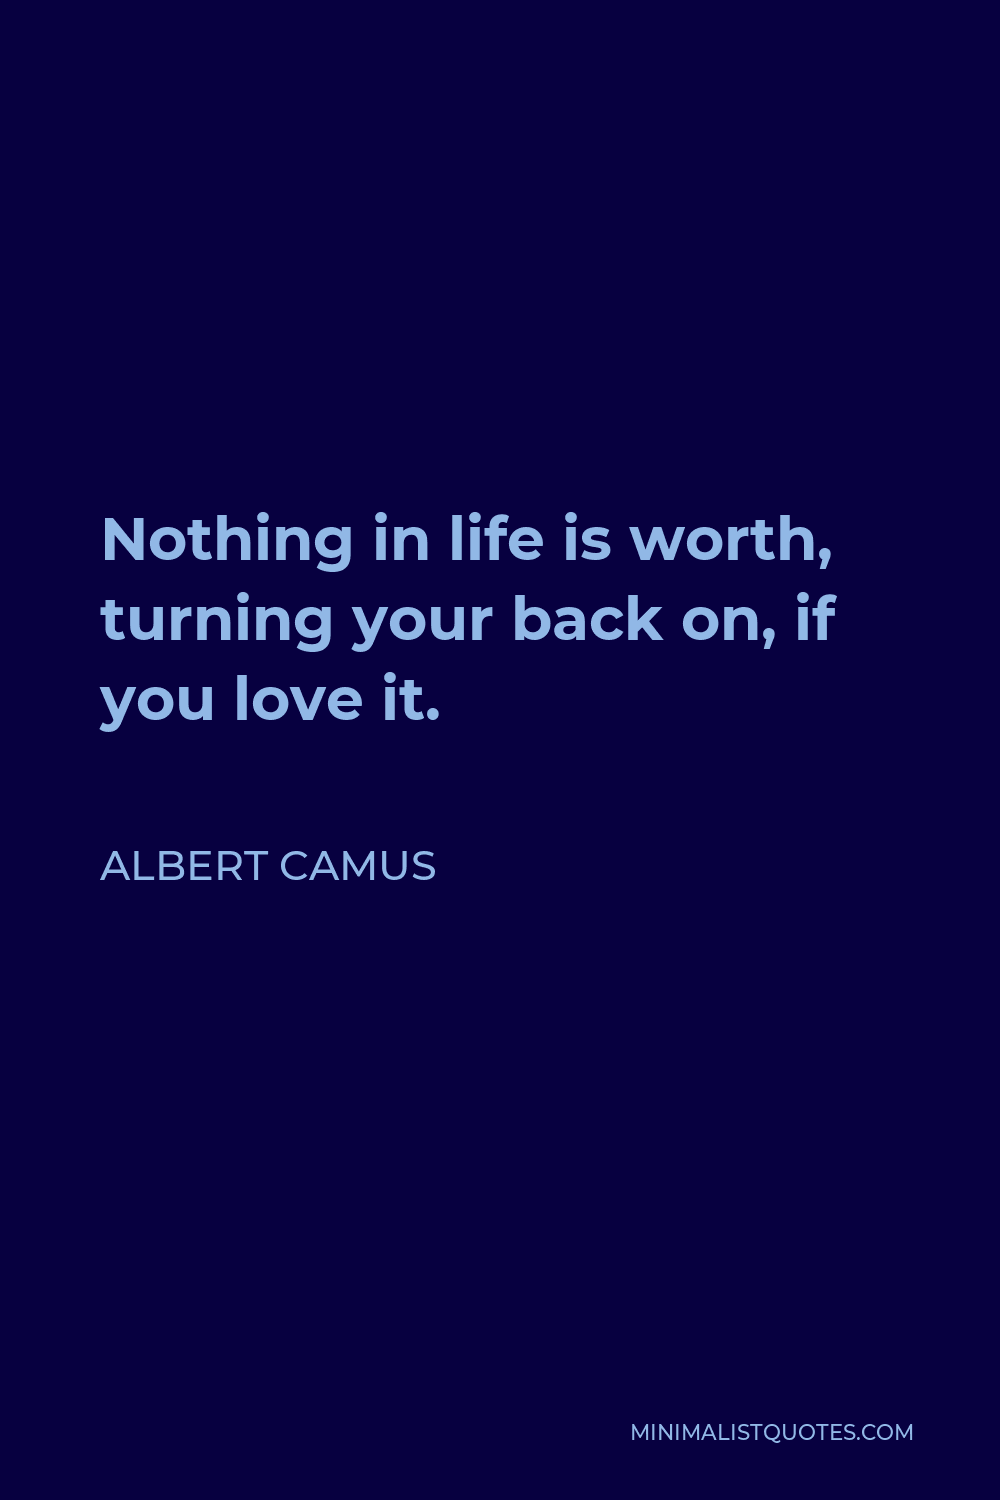 Albert Camus Quote - Nothing in life is worth, turning your back on, if you love it.